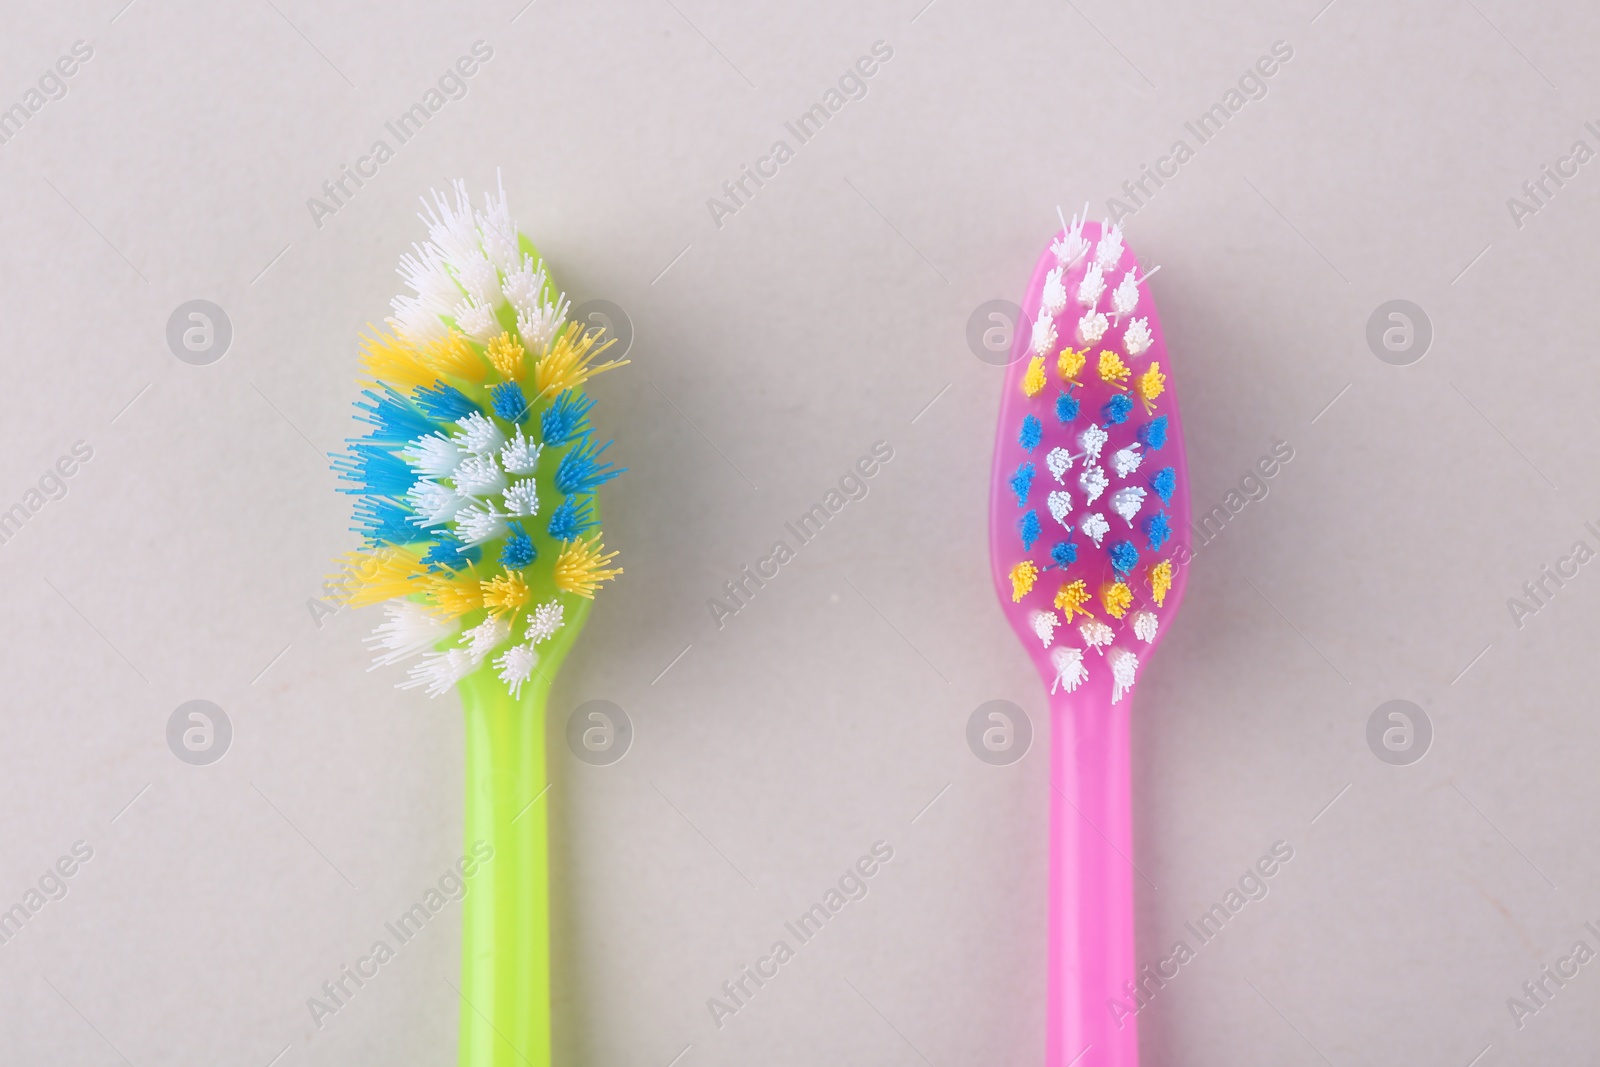 Photo of Colorful plastic toothbrushes on light background, flat lay